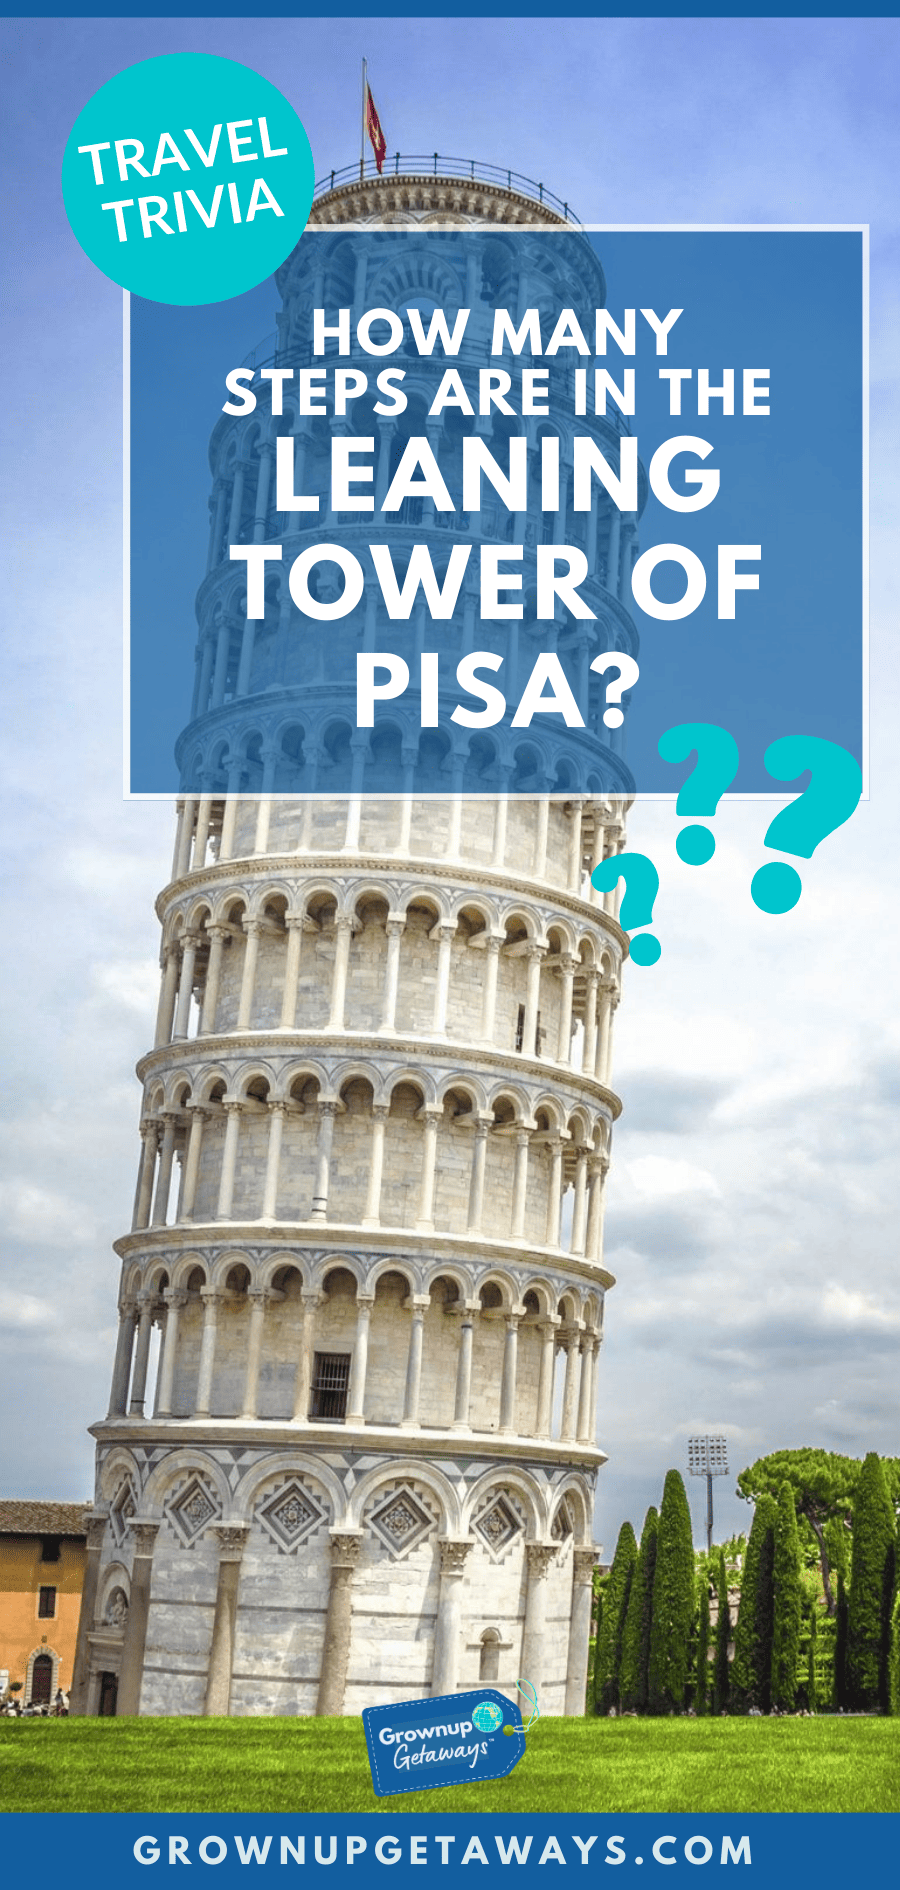 How many steps are in the Leaning Tower of Pisa?